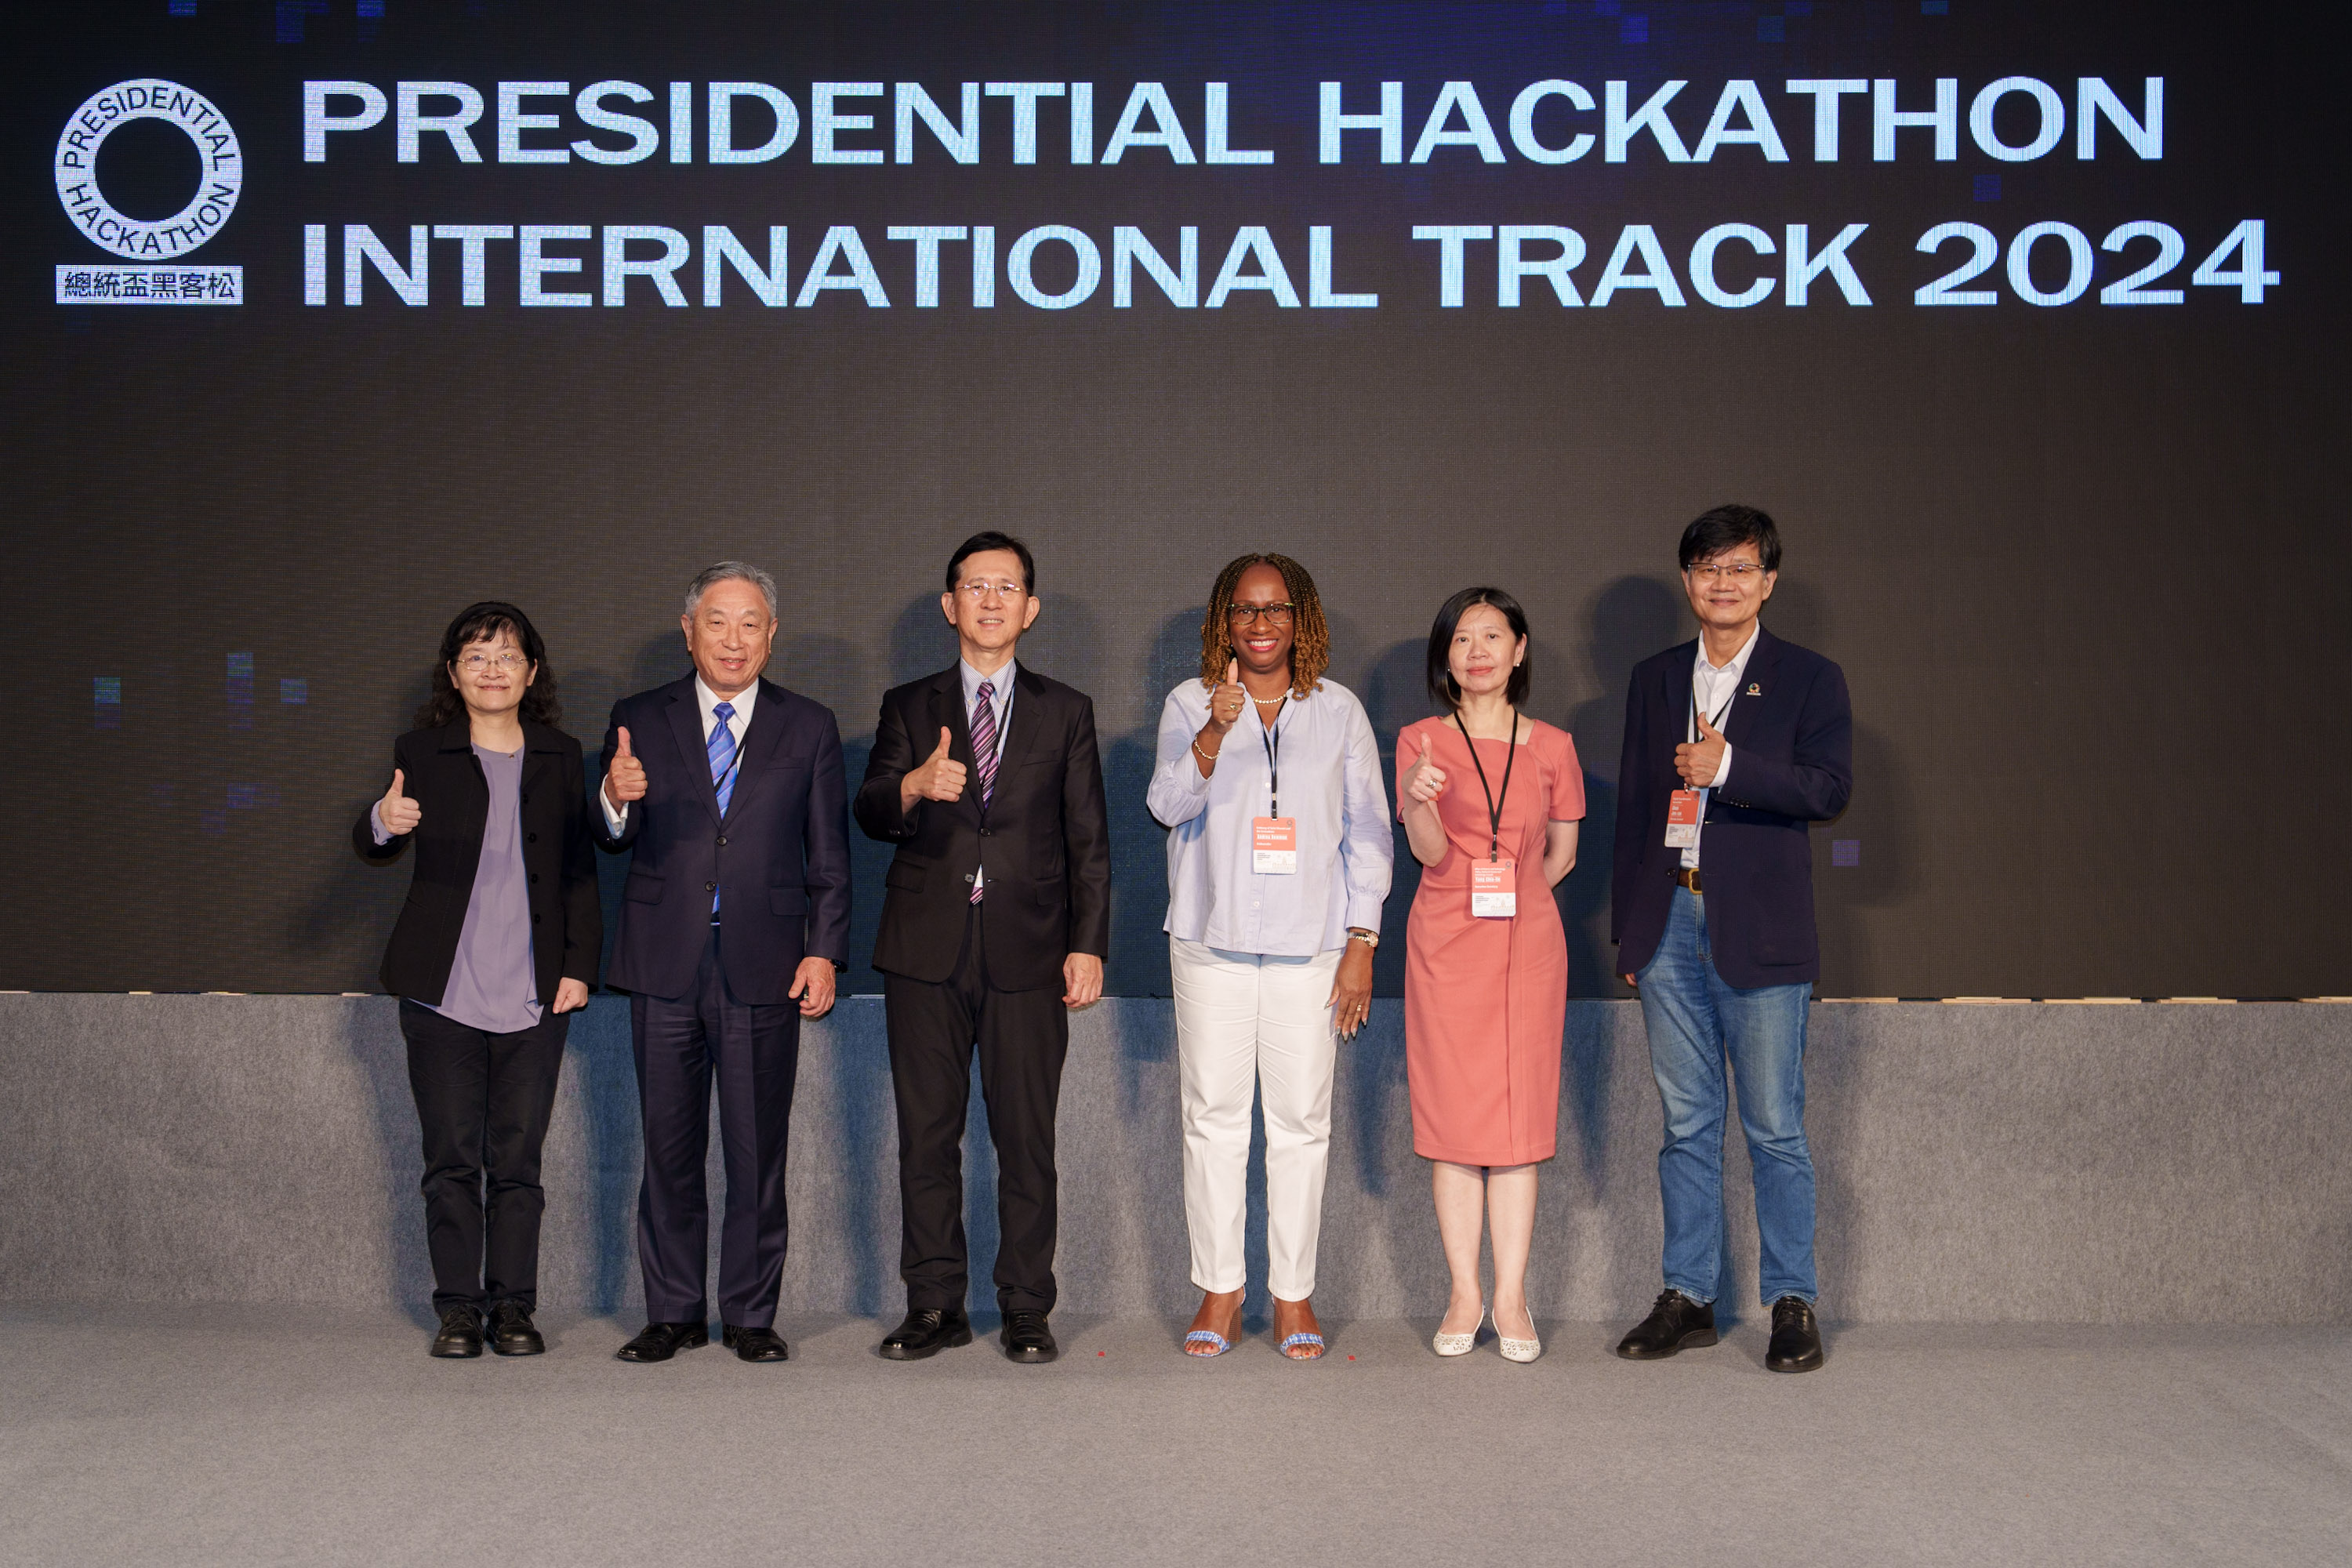 2024 Presidential Hackathon International Track: Calling on Global Hackers to Collaborate on Net-Zero Solutions